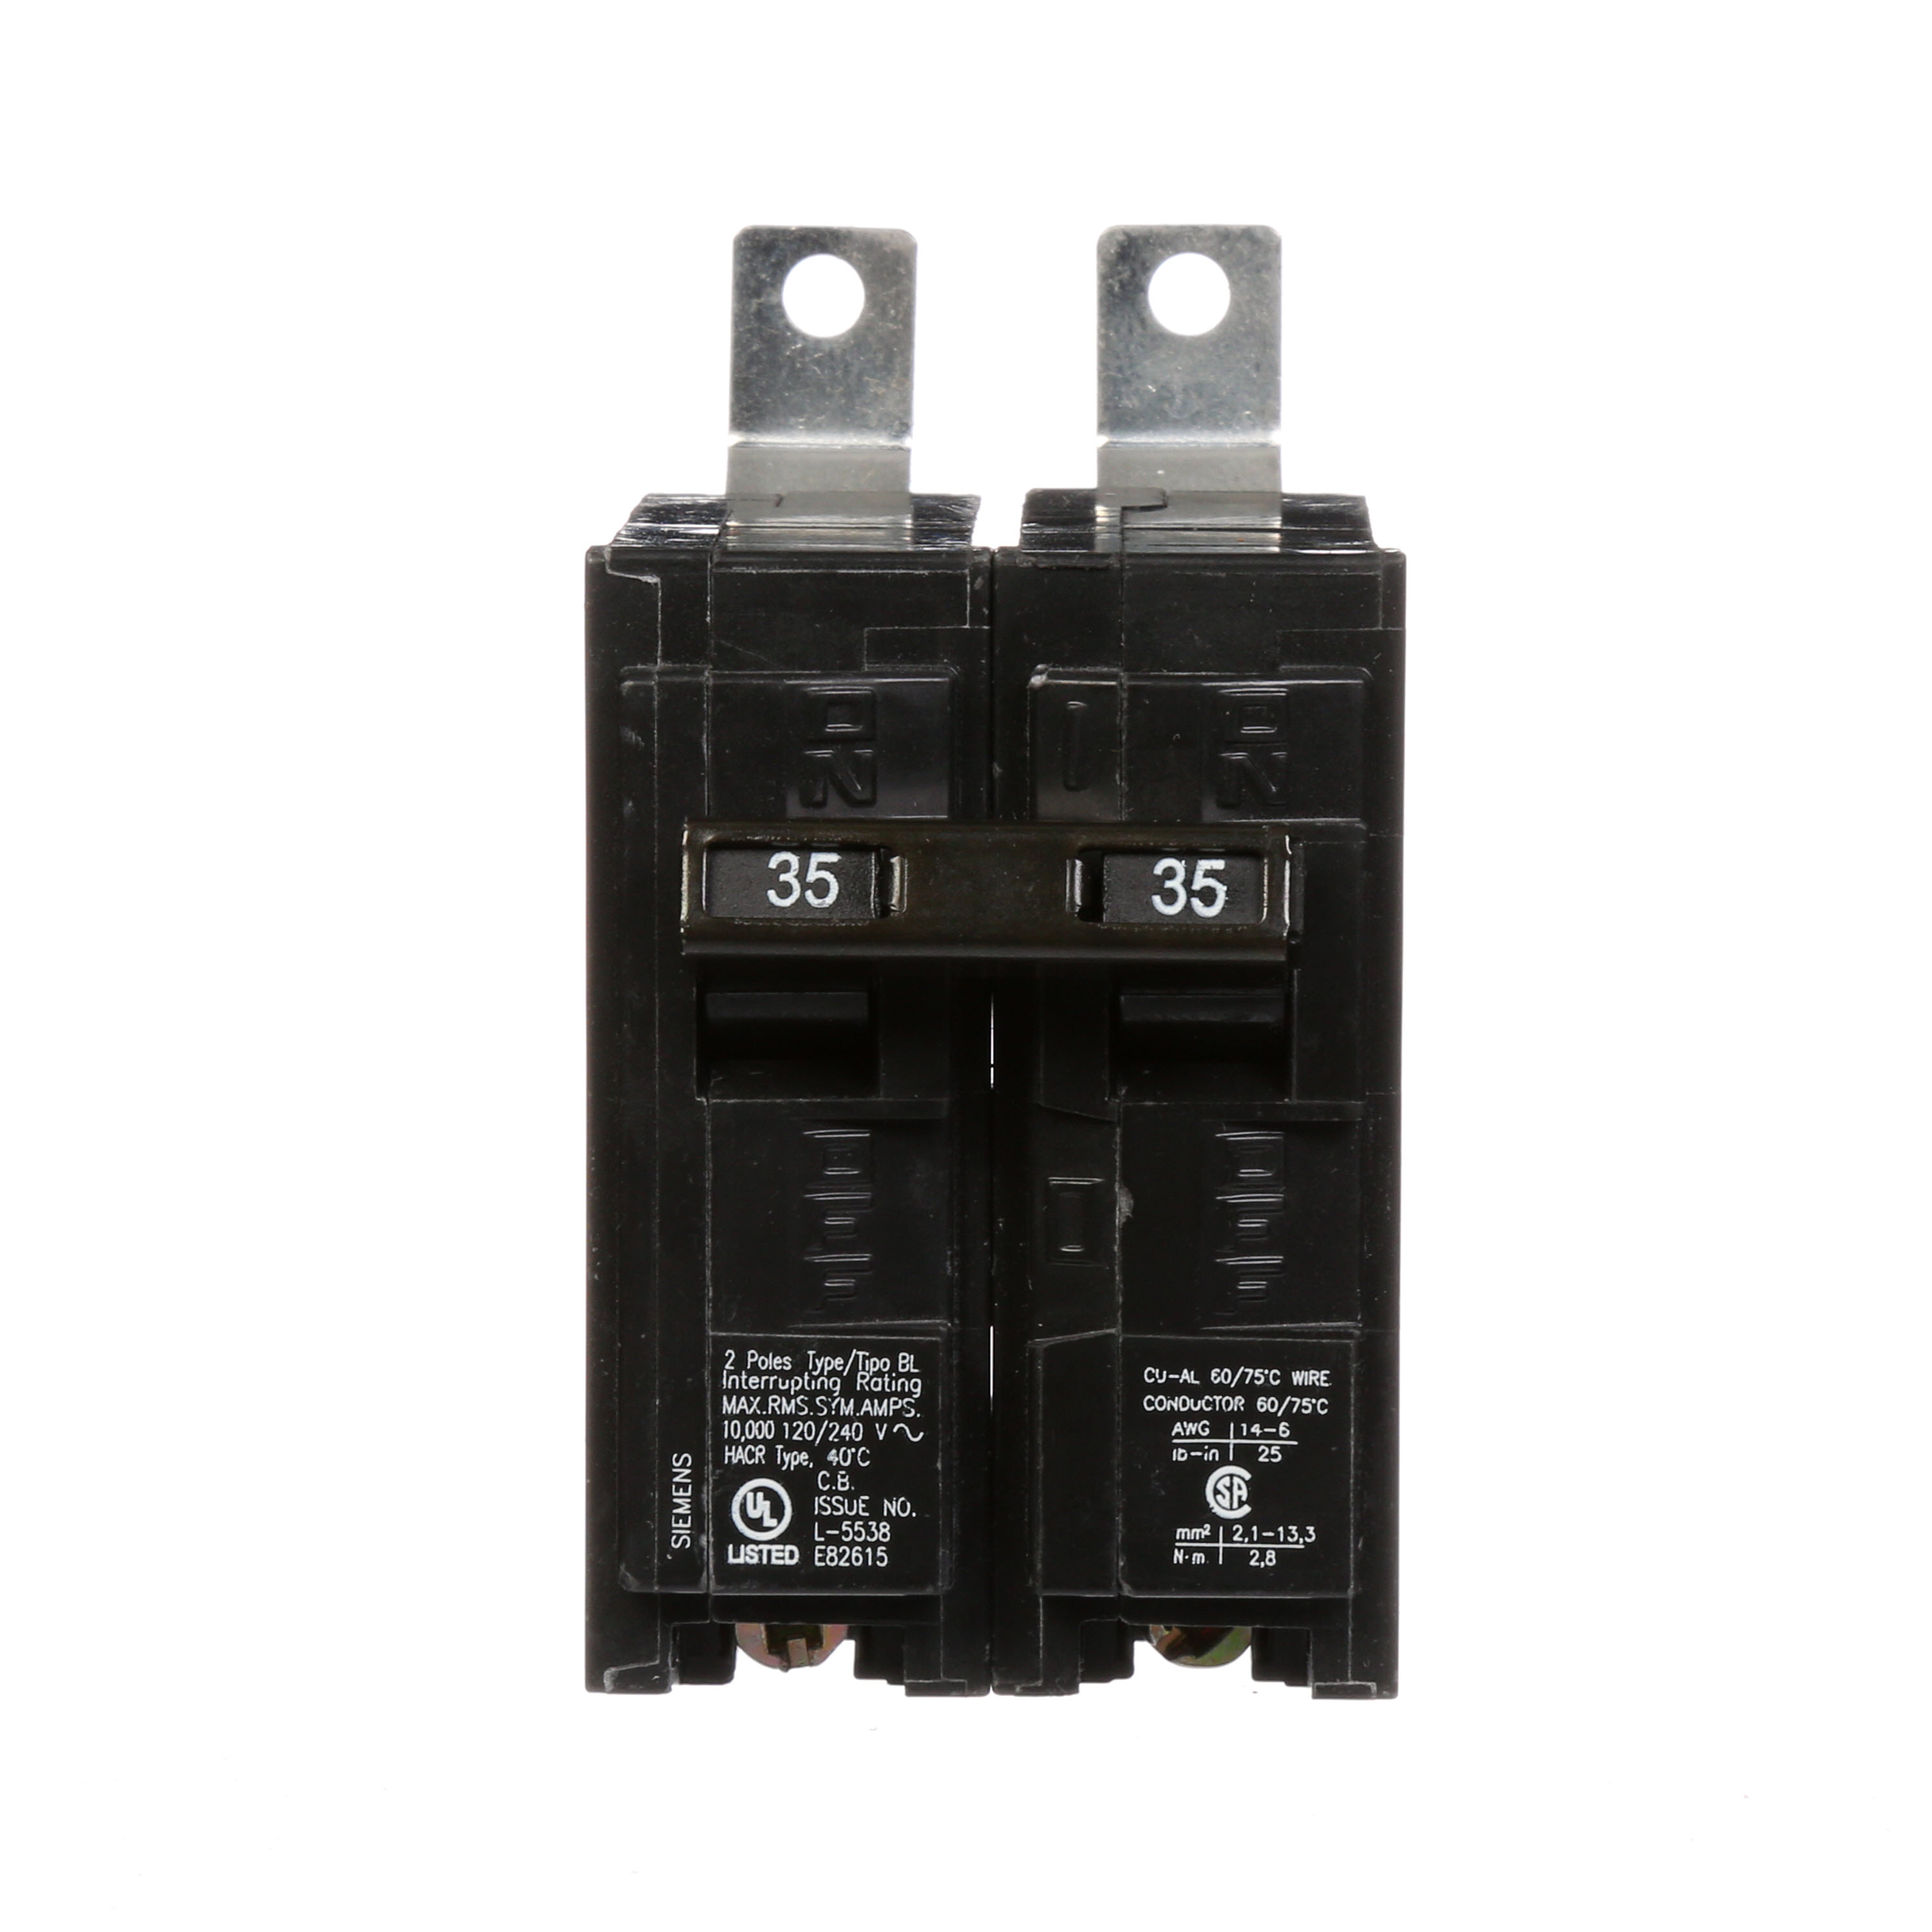 Siemens Low Voltage Molded Case Circuit Breakers Panelboard Mounting 240V Circuit Breakers - Type BL, 2-Pole, 120/240VAC are Circuit Protection Molded Case Circuit Breakers. Type BL Application Electrical Distribution Standard UL 489 Voltage Rating 120/240V Am perage Rating 35A Trip Range Thermal Magnetic Interrupt Rating 10 AIC Number Of Poles 2P